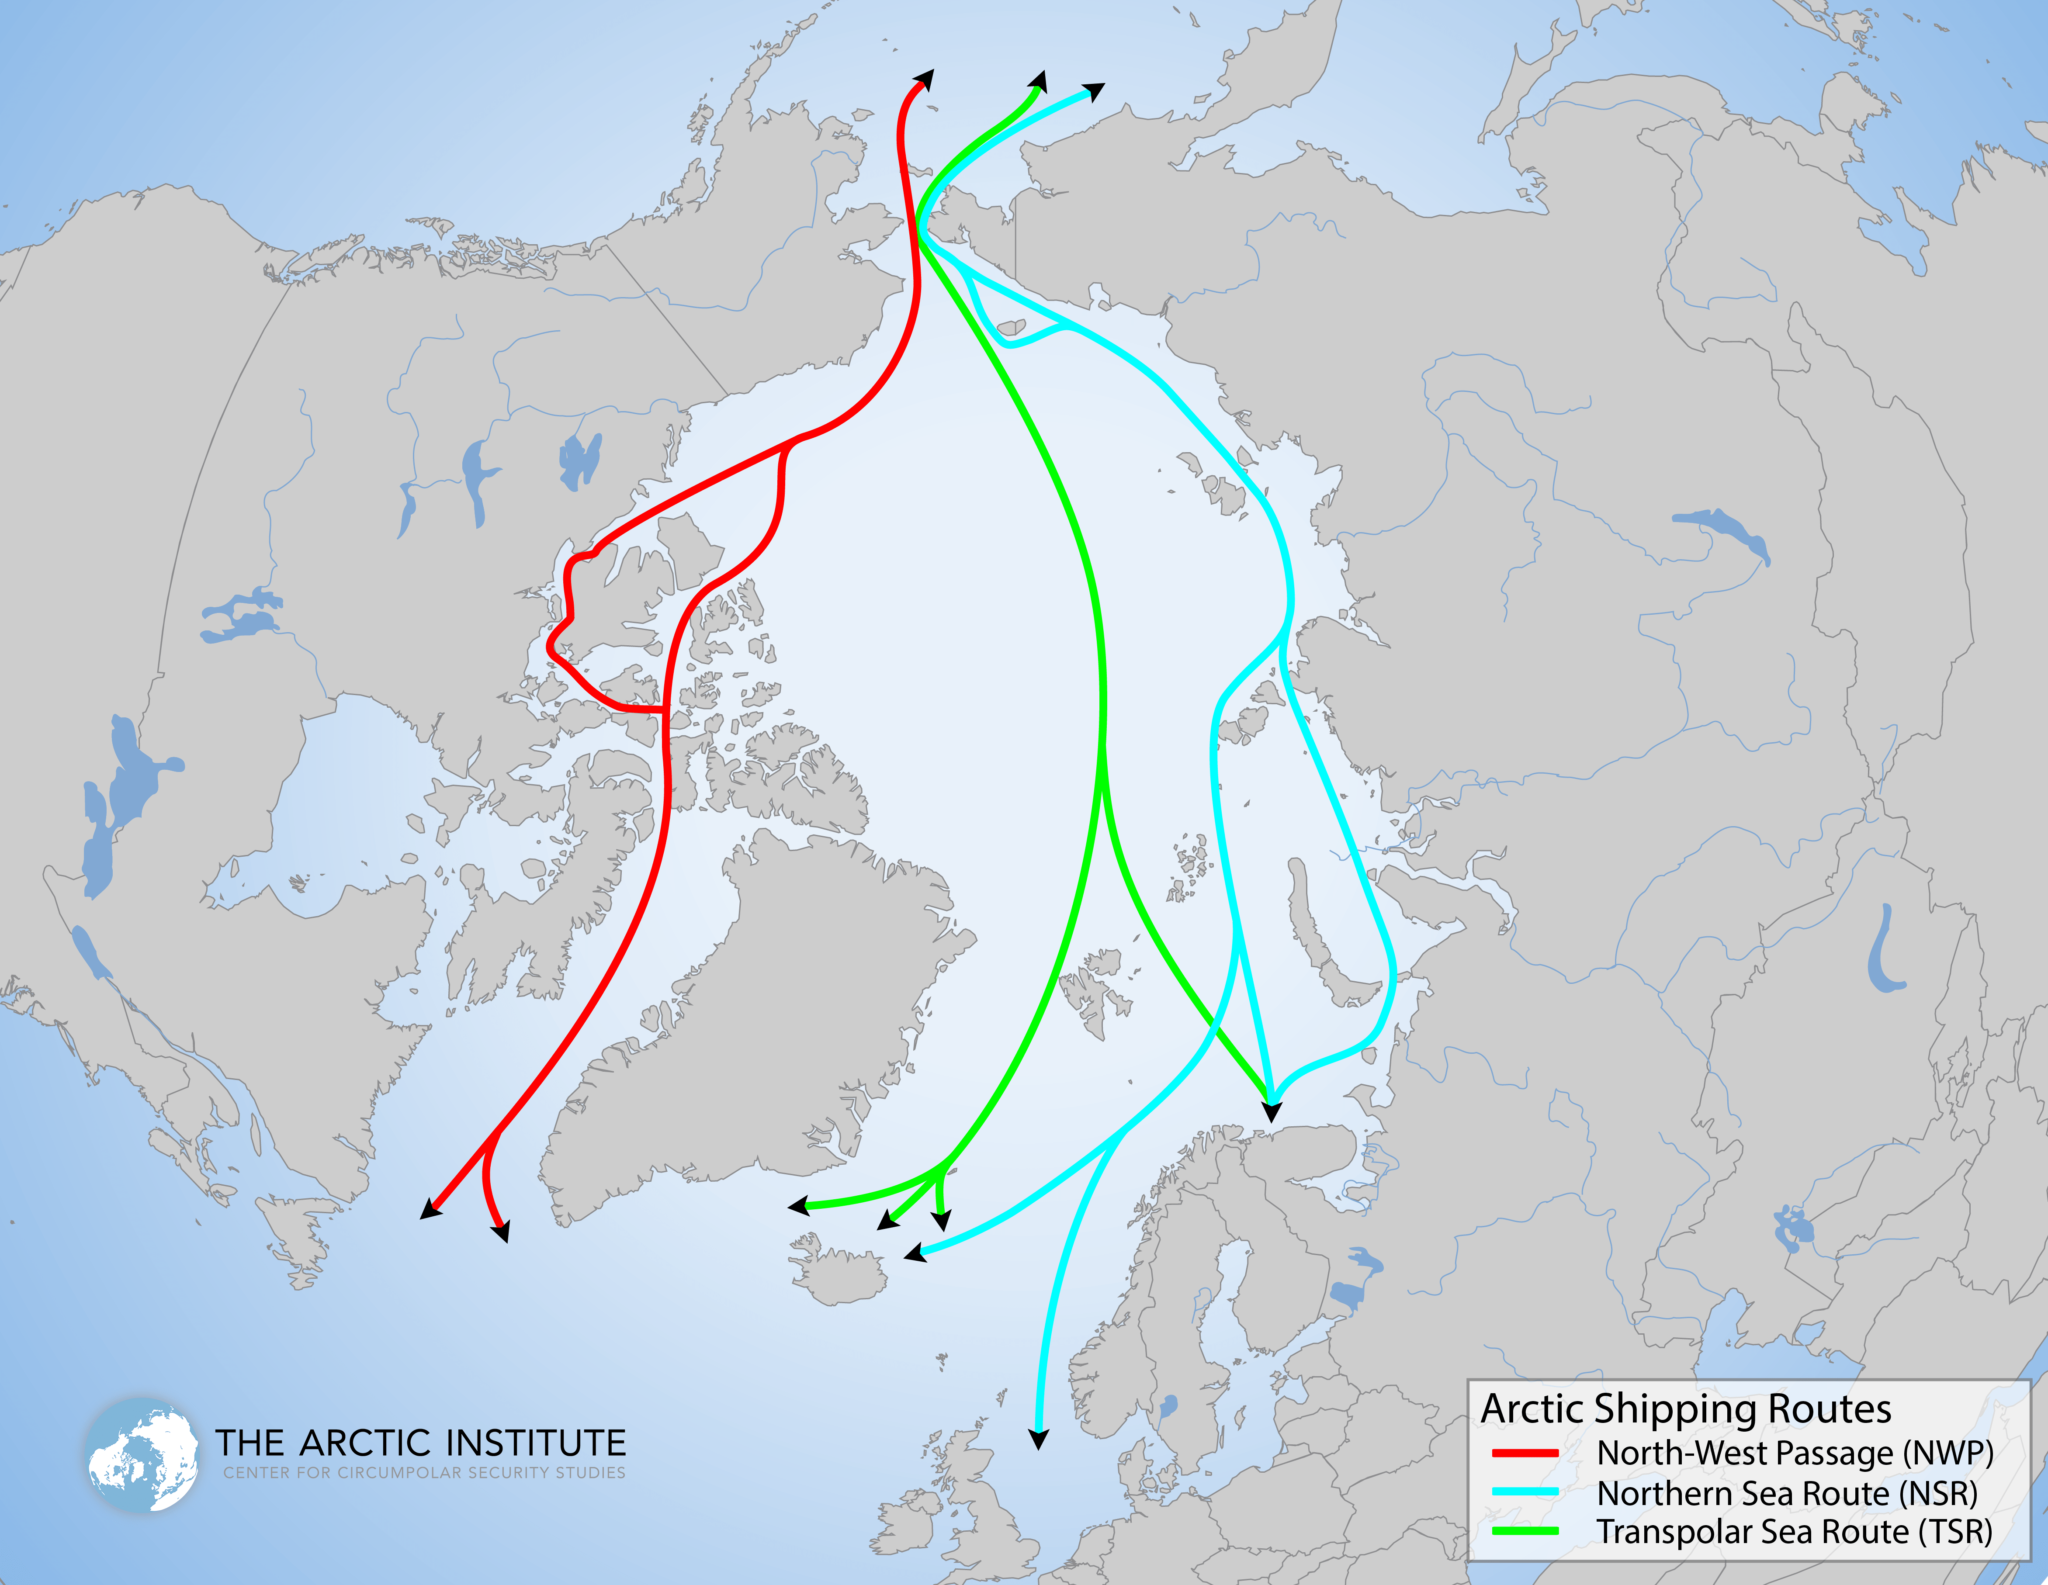 Arctic shipping routes map (Source: The Arctic Institute)